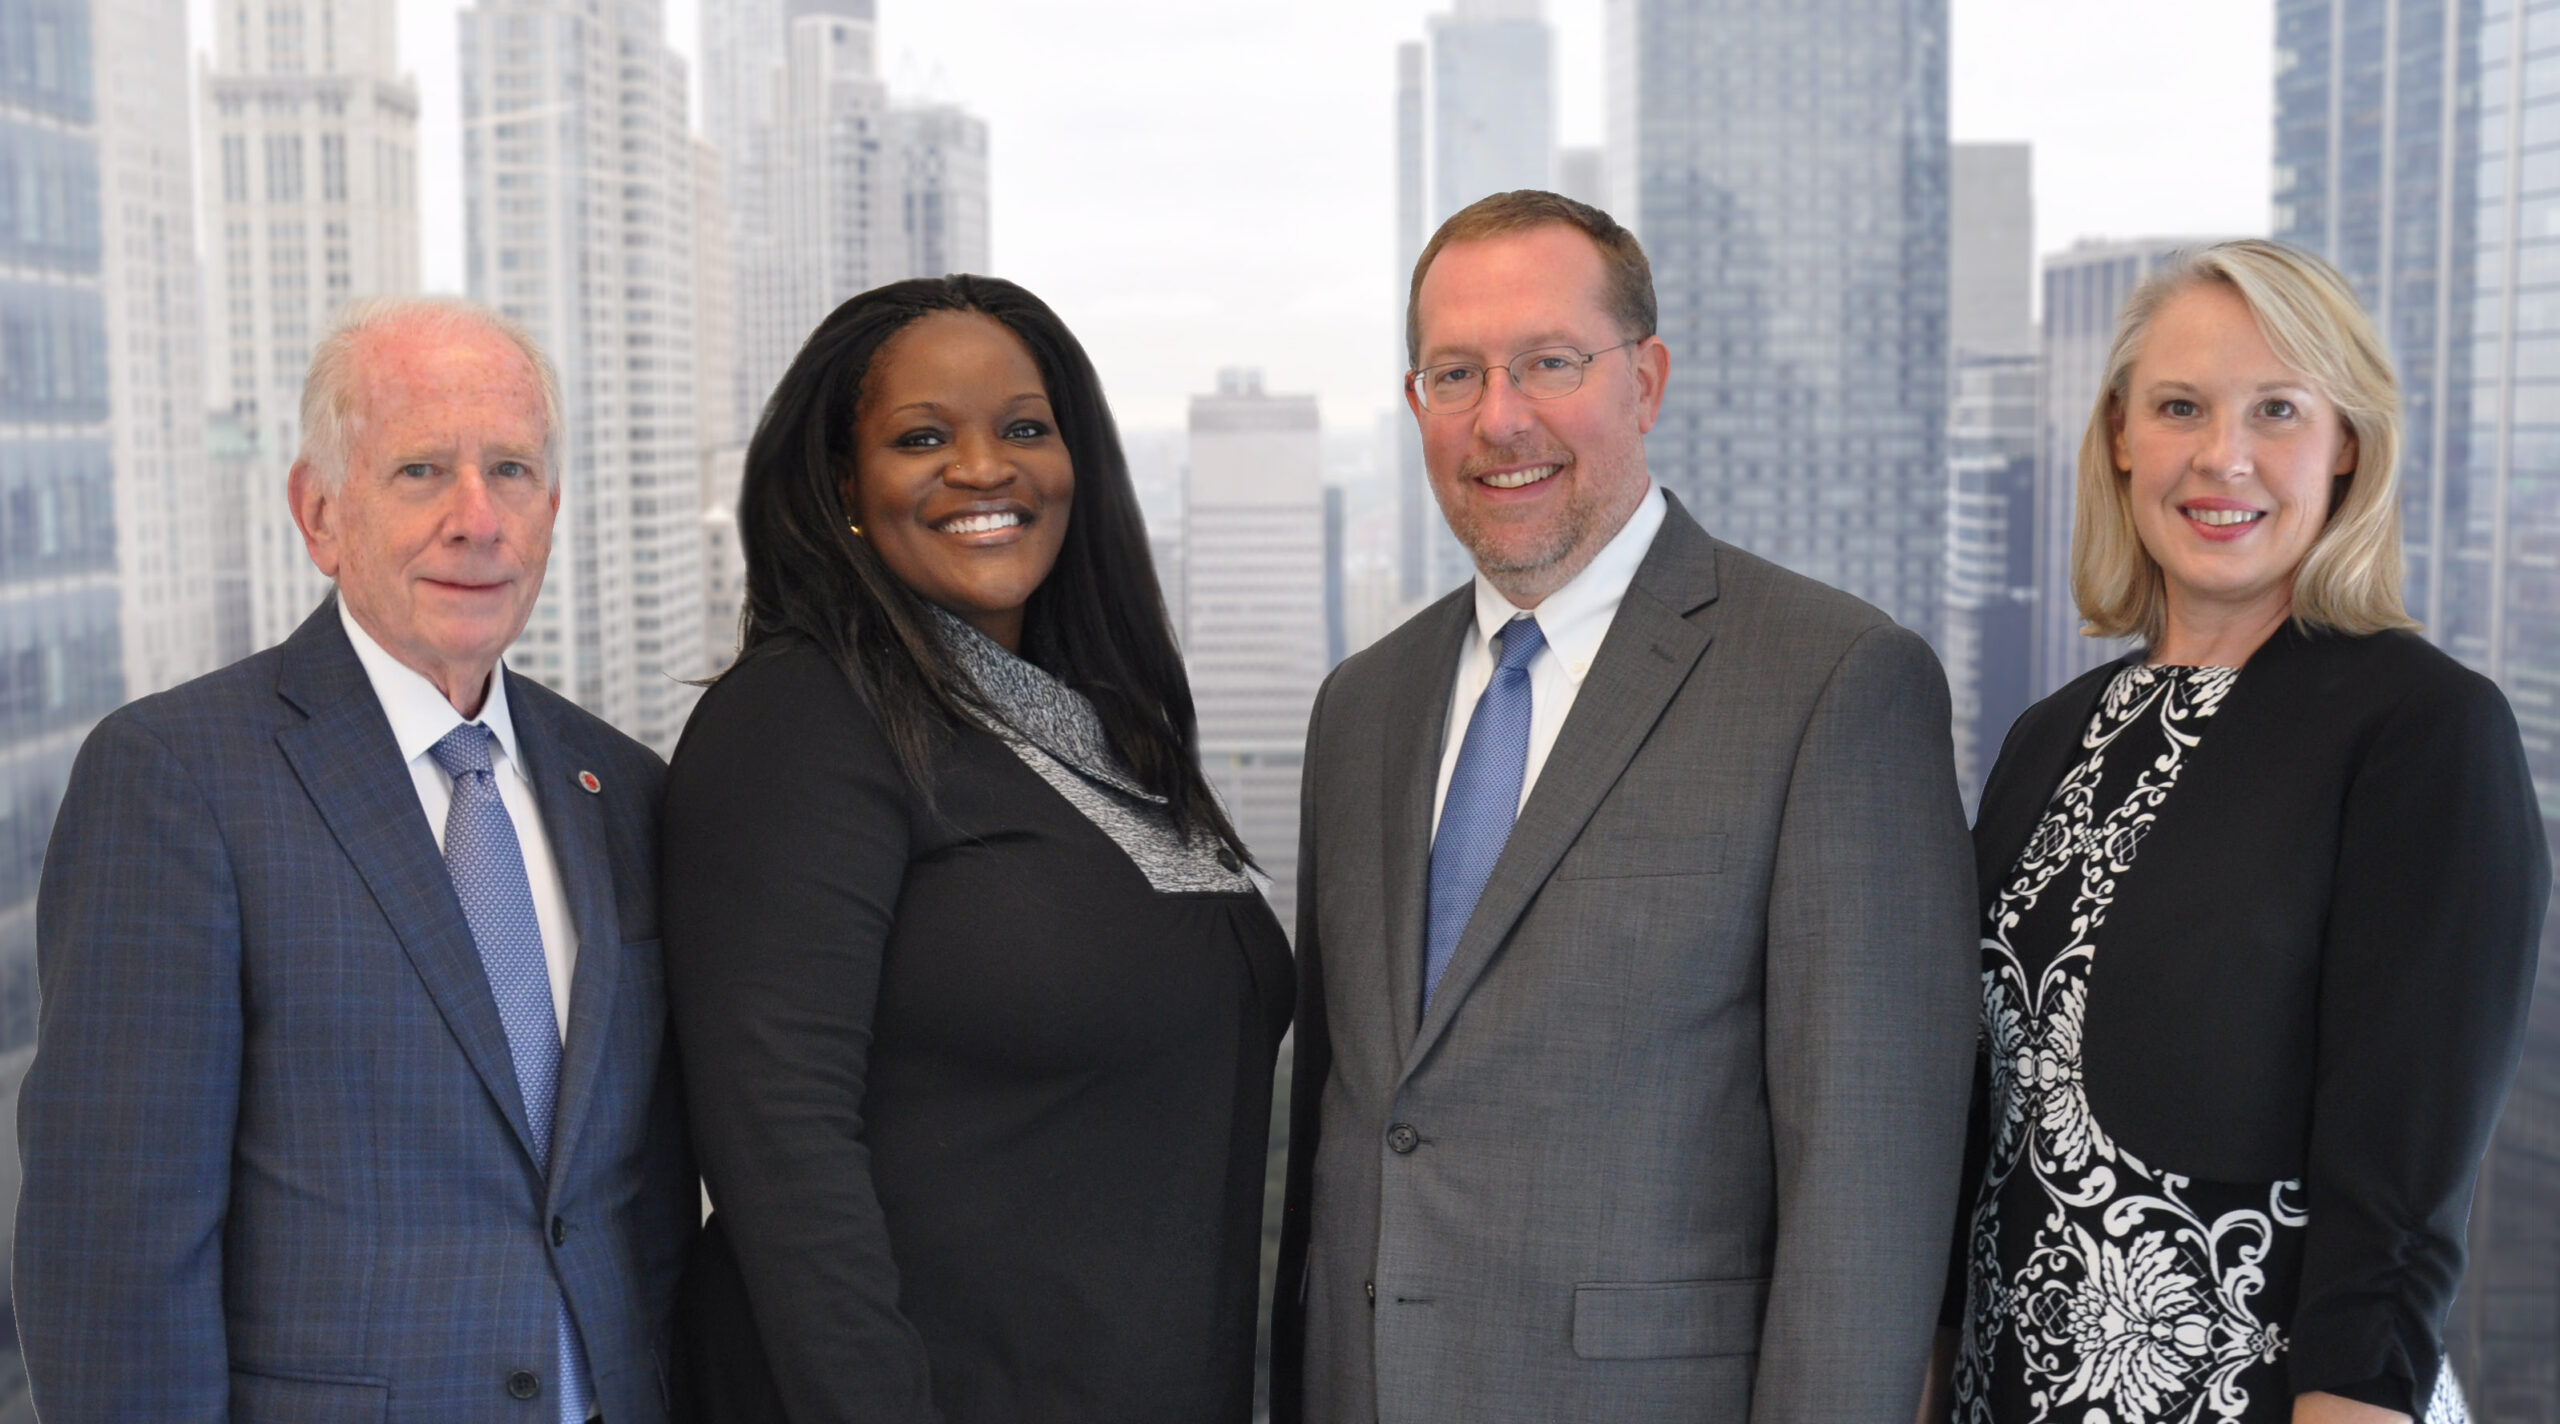  The Office of the Chief Executive, from left to right - Dr. Allan E. Goodman, Courtney Temple, Jason Czyz, Sarah Ilchman